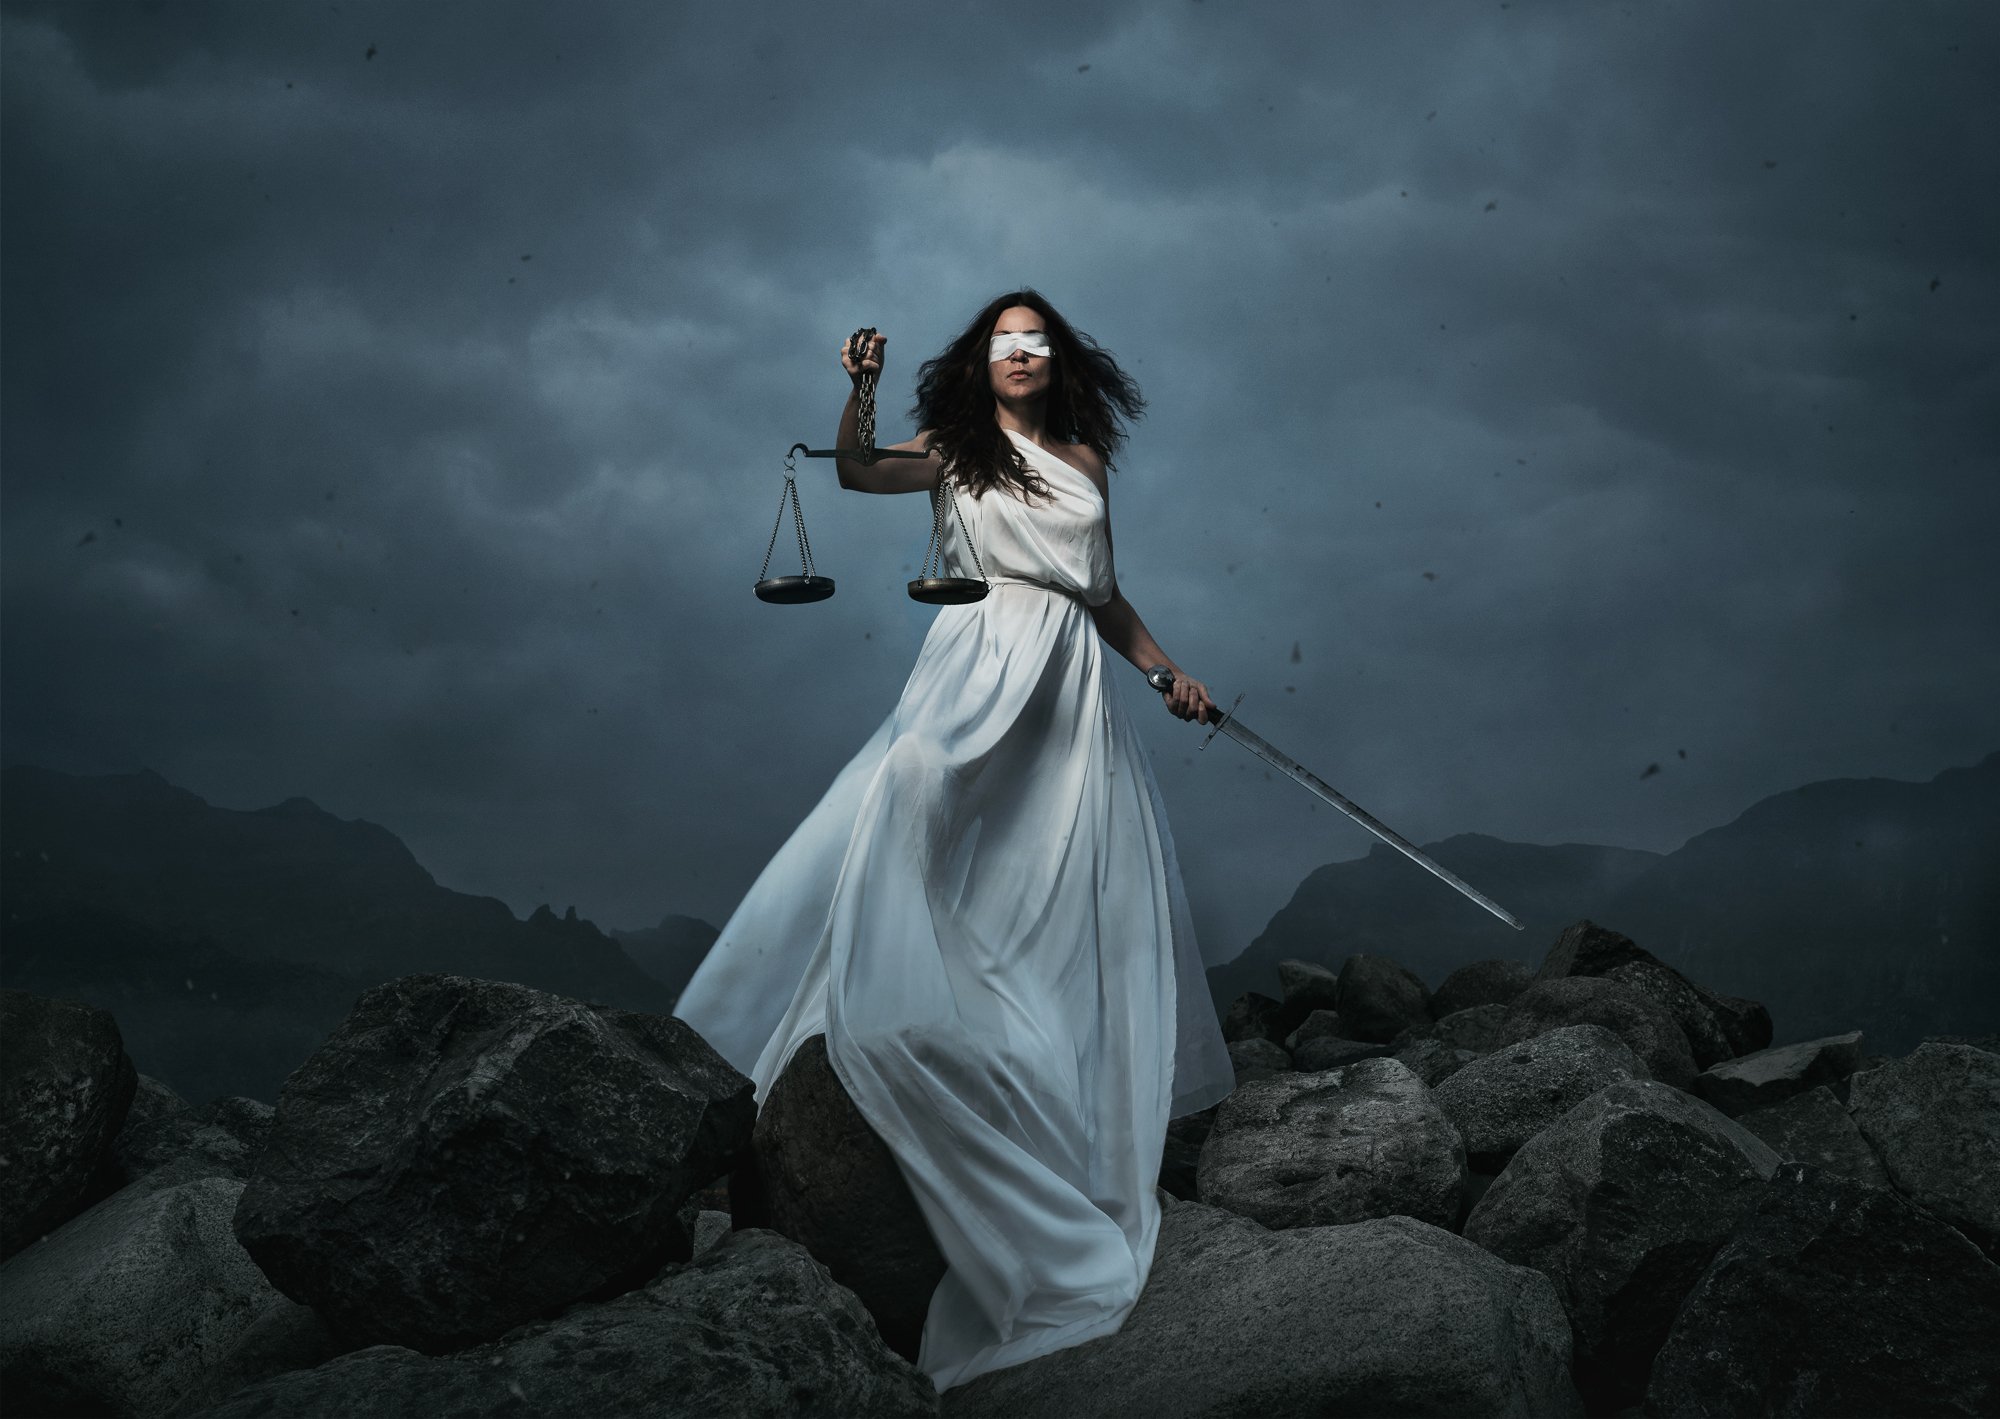 justice,temida,woman,strong,strenght,tough,rigts,law,mountain,rocks,scale,sword,fight,conceptual,concept,female,wind,, Przemyslaw Koch